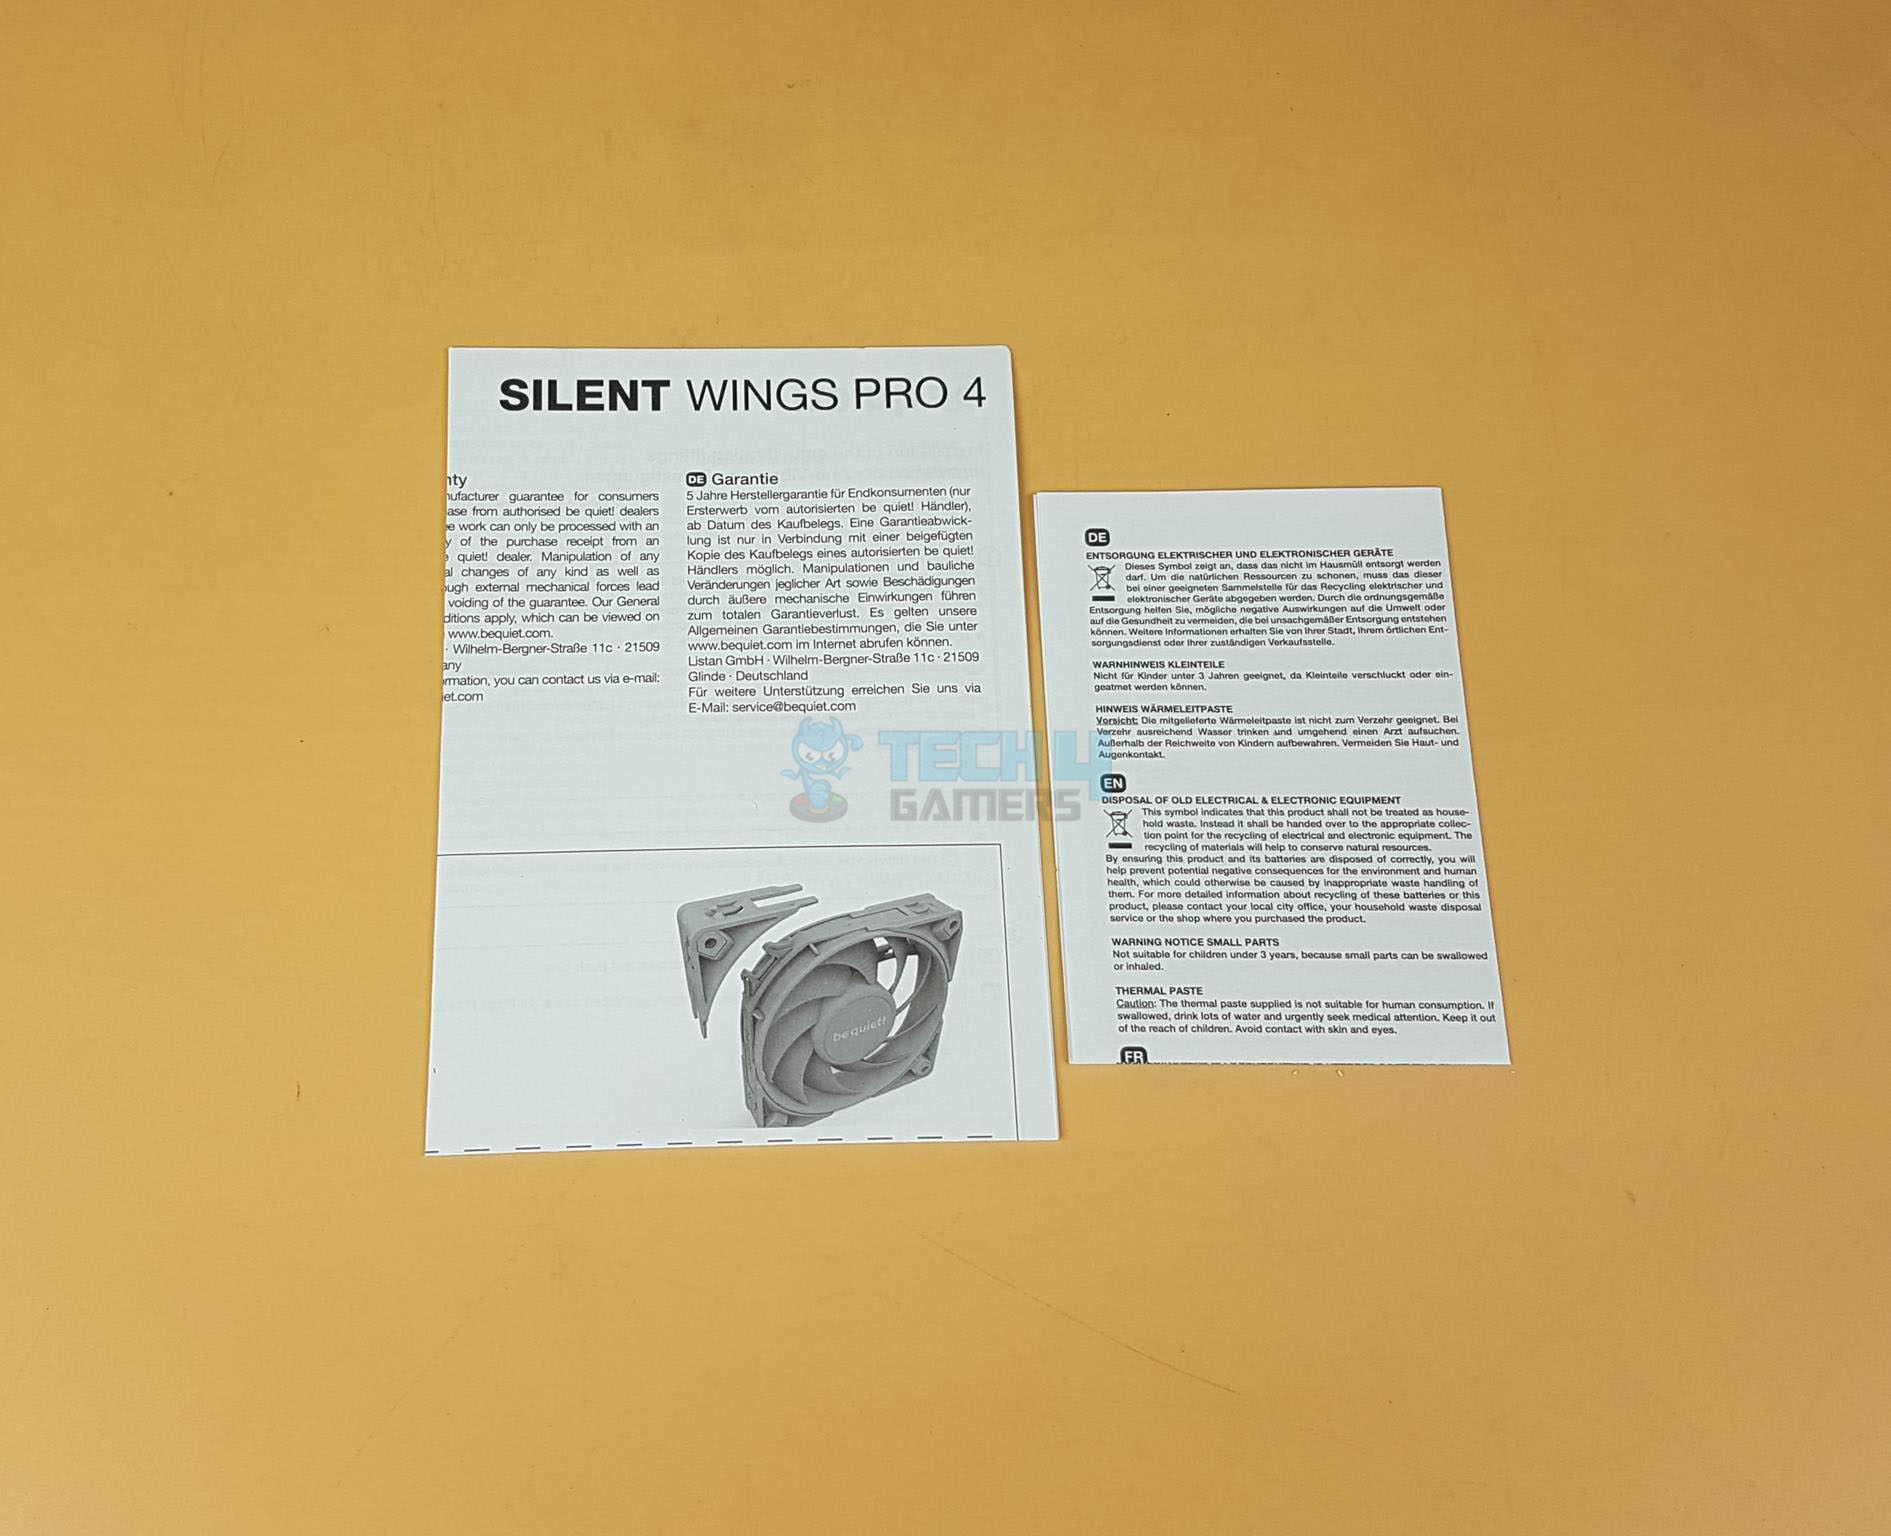 be quiet! Silent Wings Pro 4 Manual